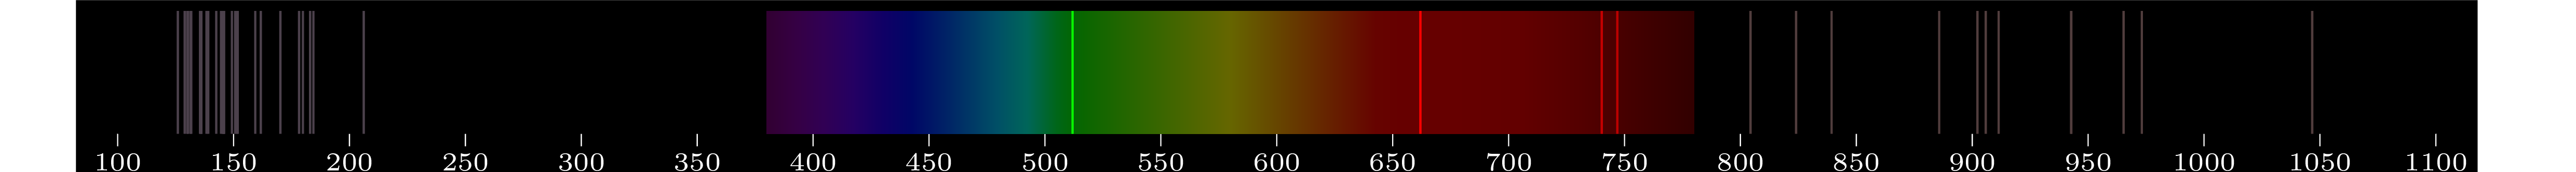 emmision spectra of element I